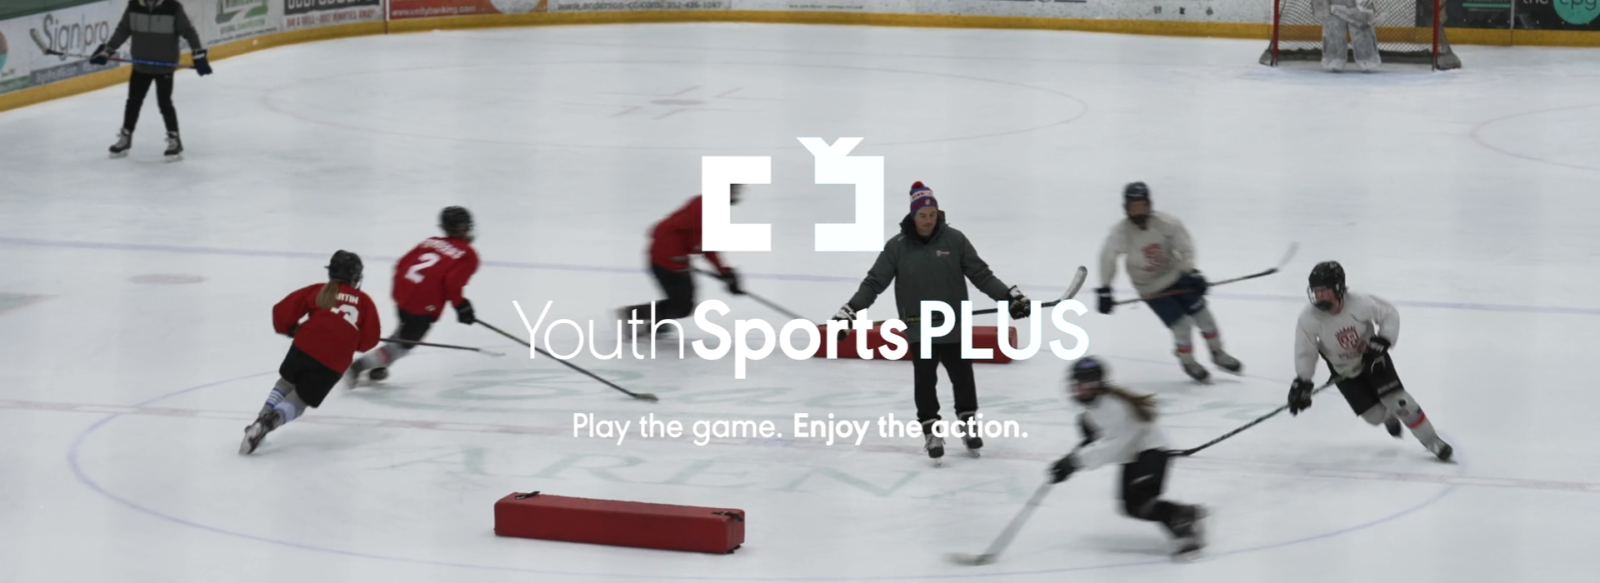 Youth Sports Plus streams thousands of games on MNHockey using Spiideo Play